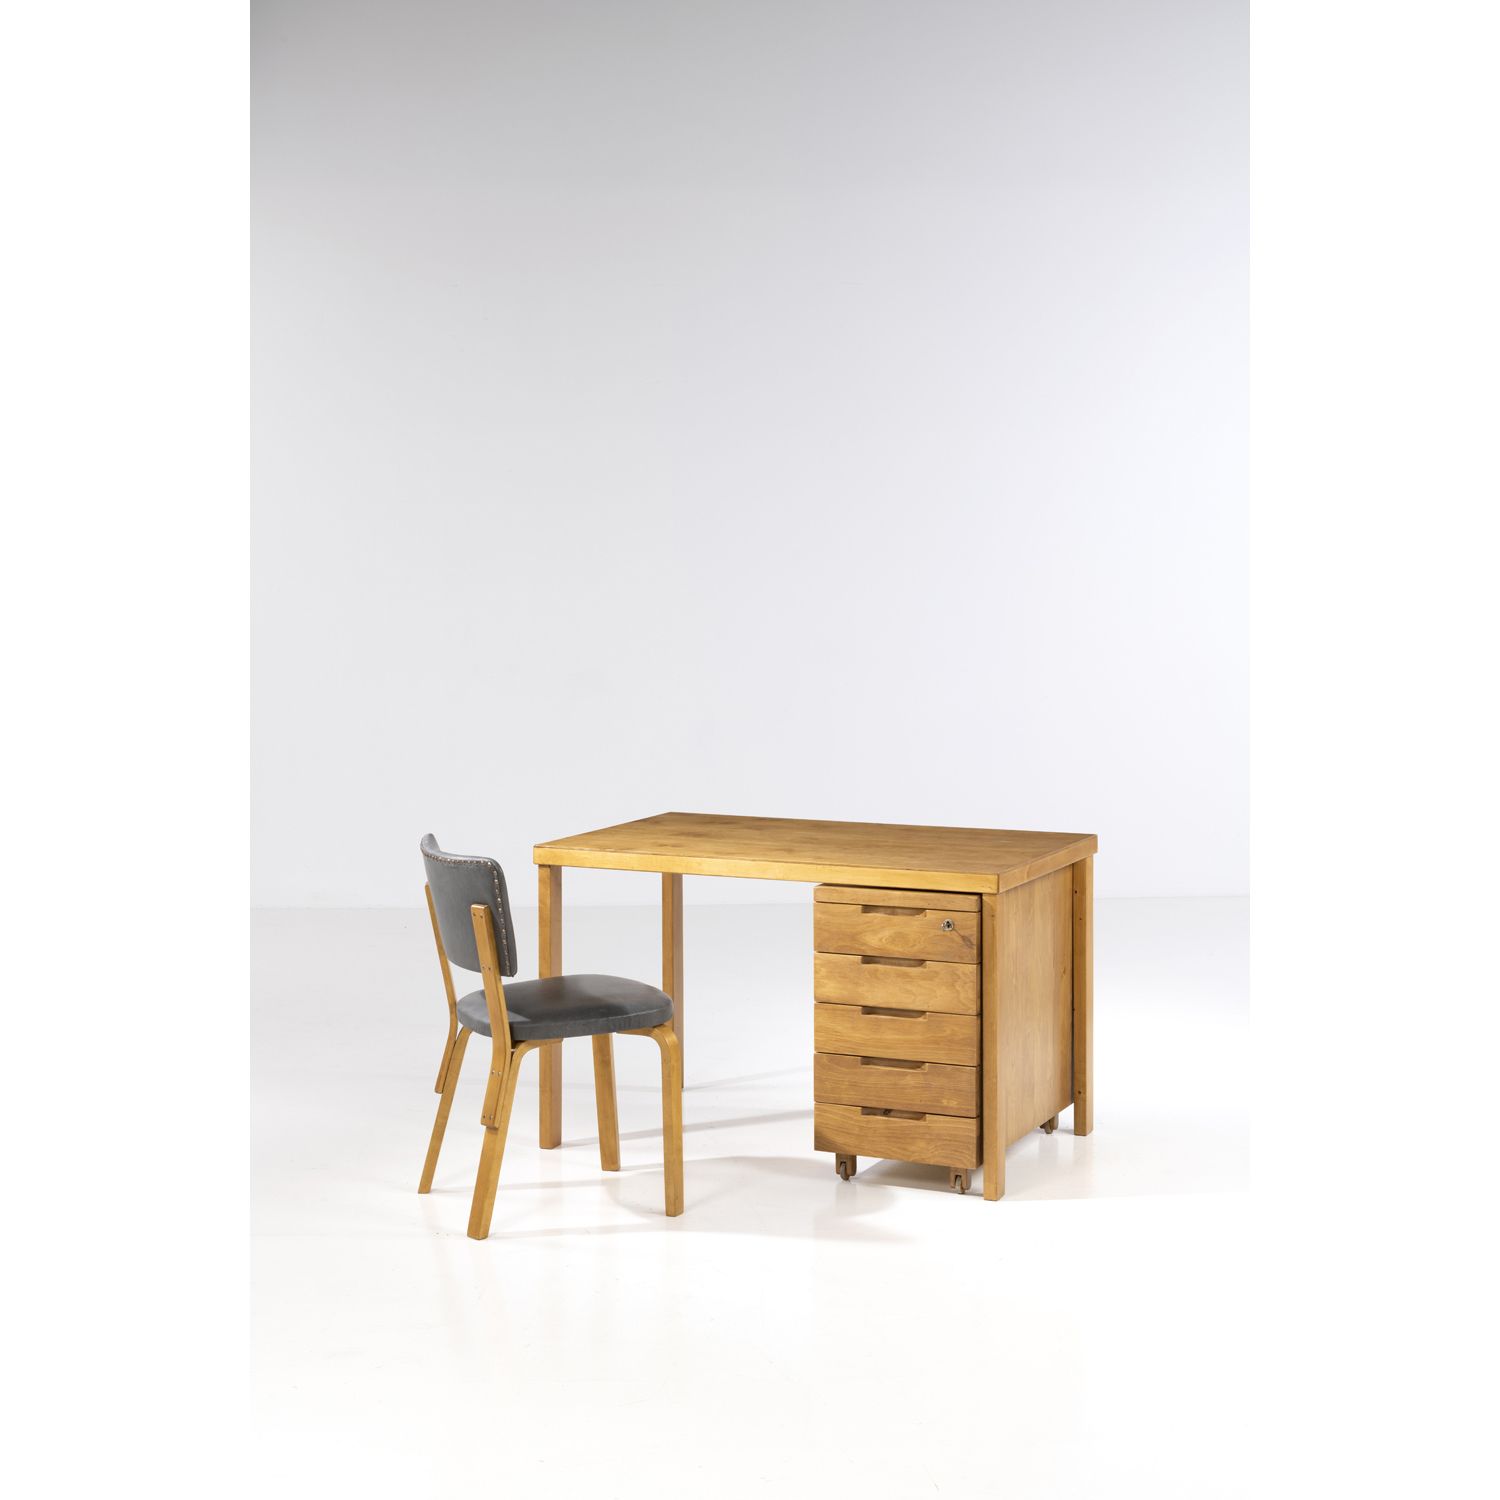 Null Alvar Aalto (1898-1976)

Desk and chair

Birch wood and fabric

Model creat&hellip;